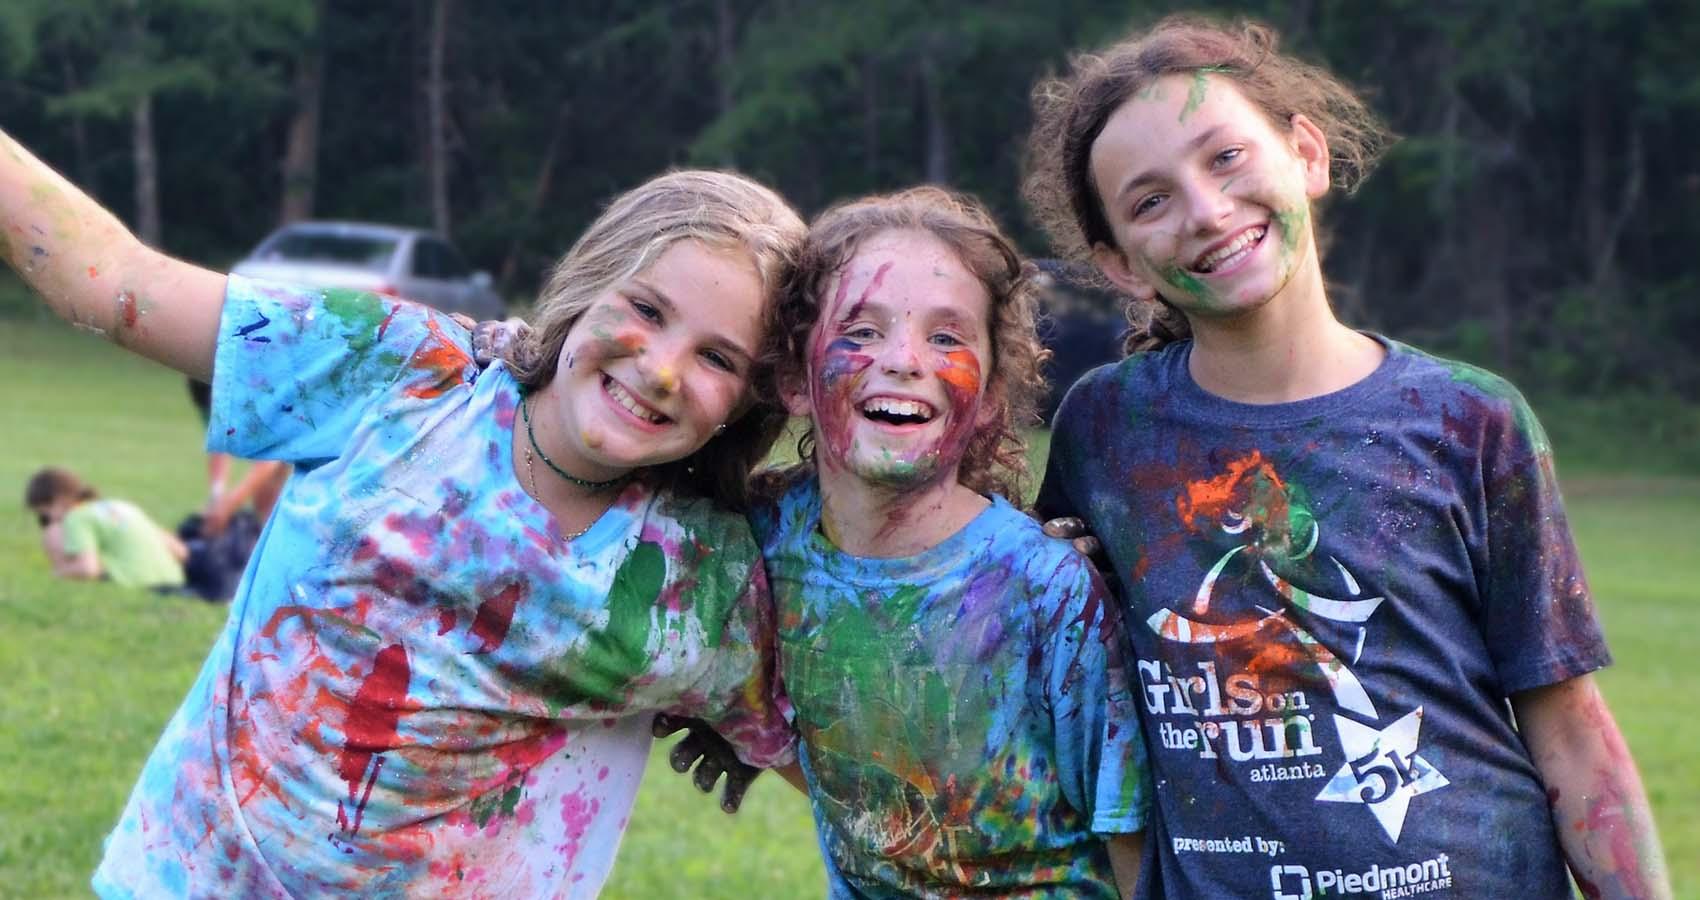 Campers covered in paint smiling for camera